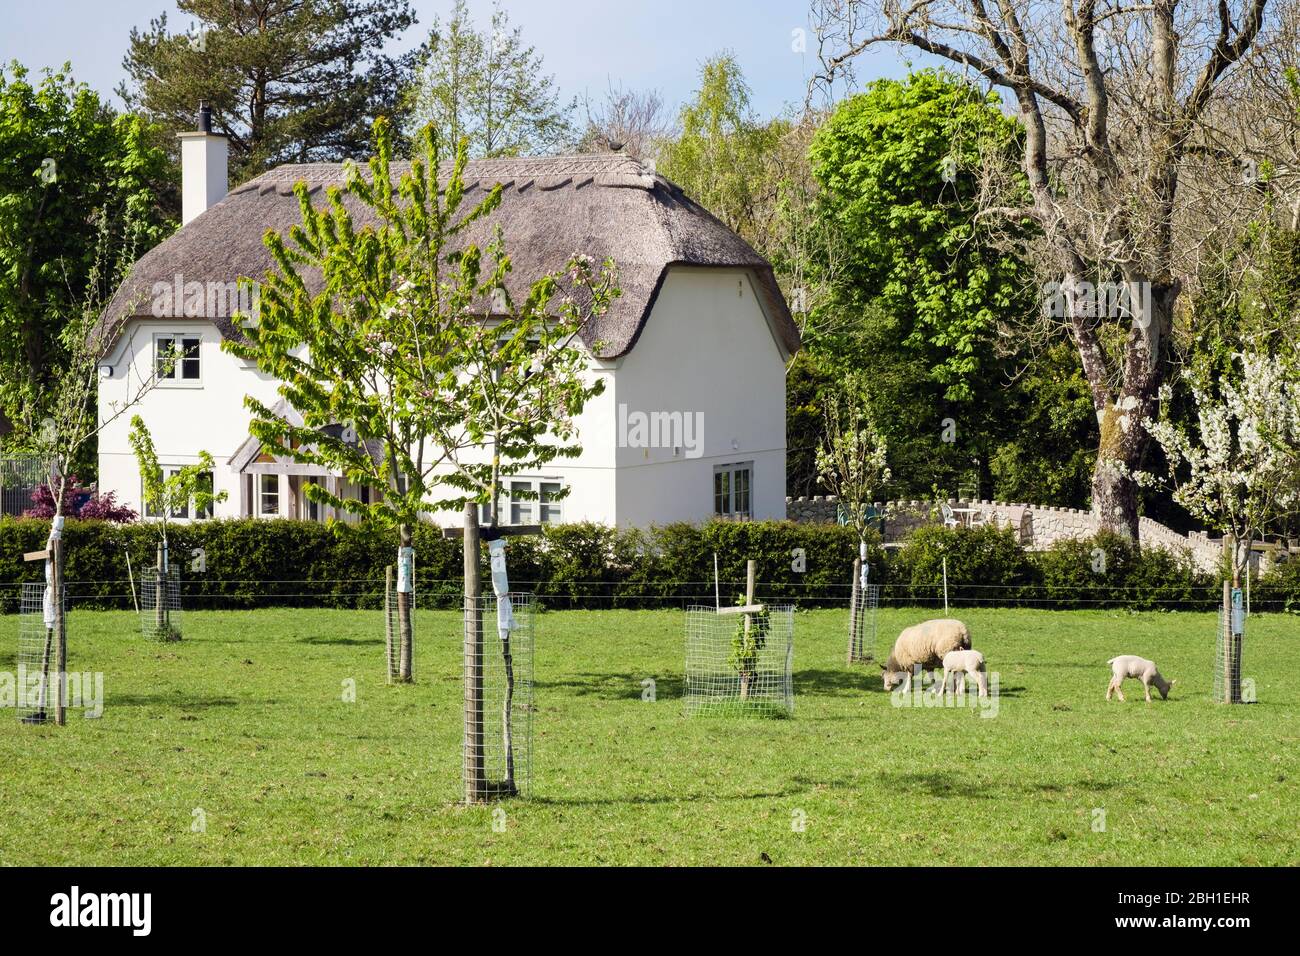 Thatched country cottage with sheep and lambs in rural setting. Benllech, Isle of Anglesey, Wales, UK, Britain Stock Photo